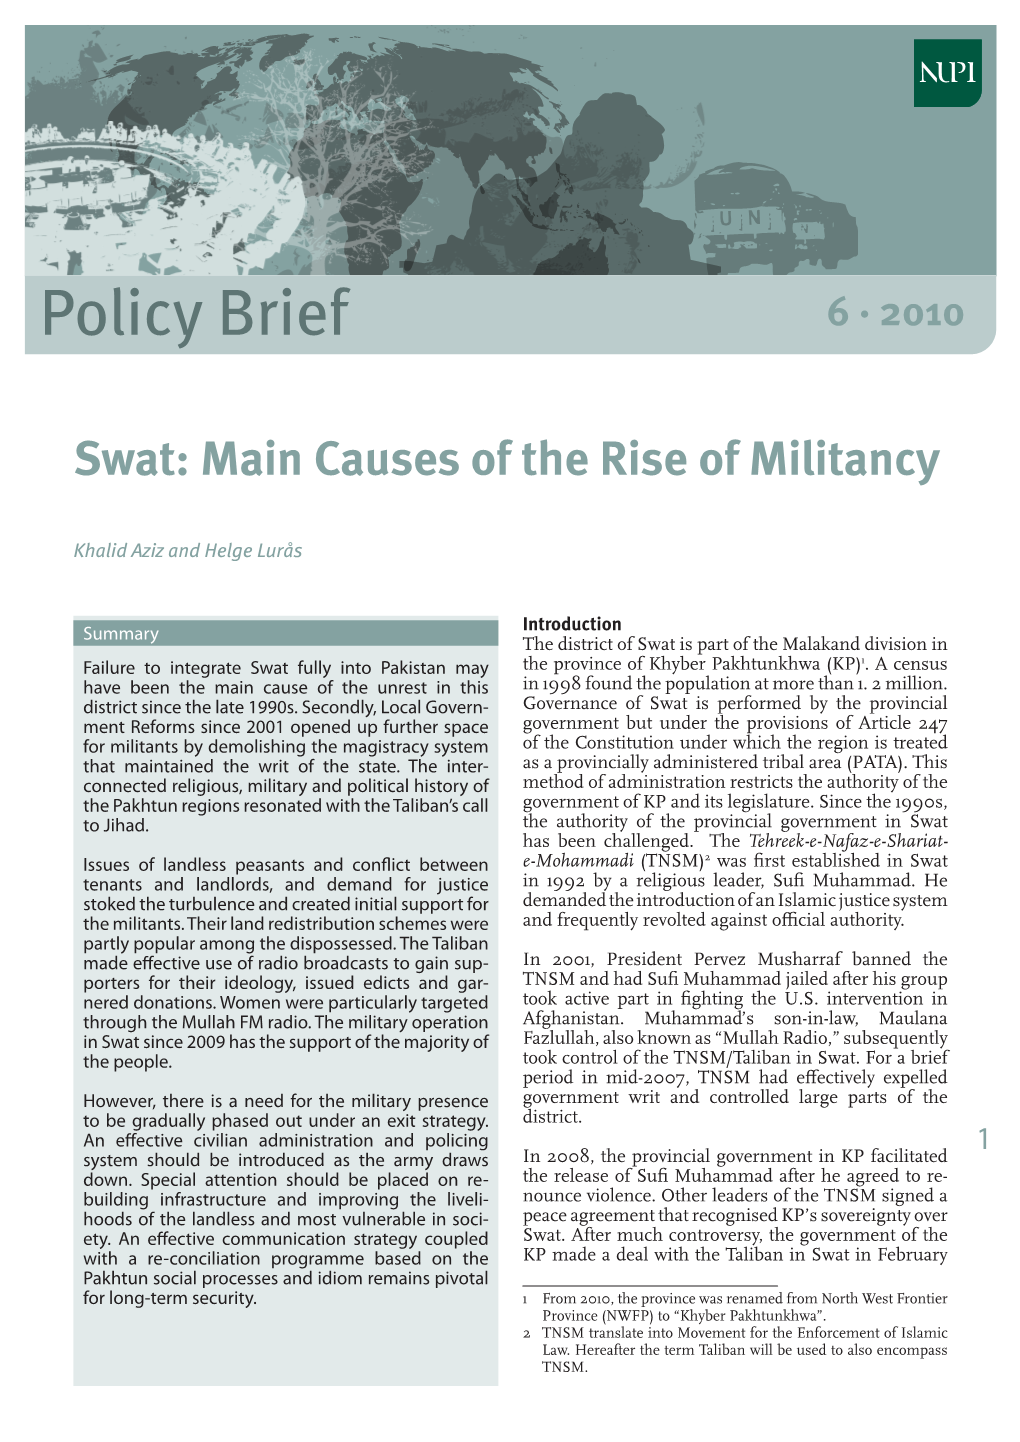 Swat: Main Causes of the Rise of Militancy